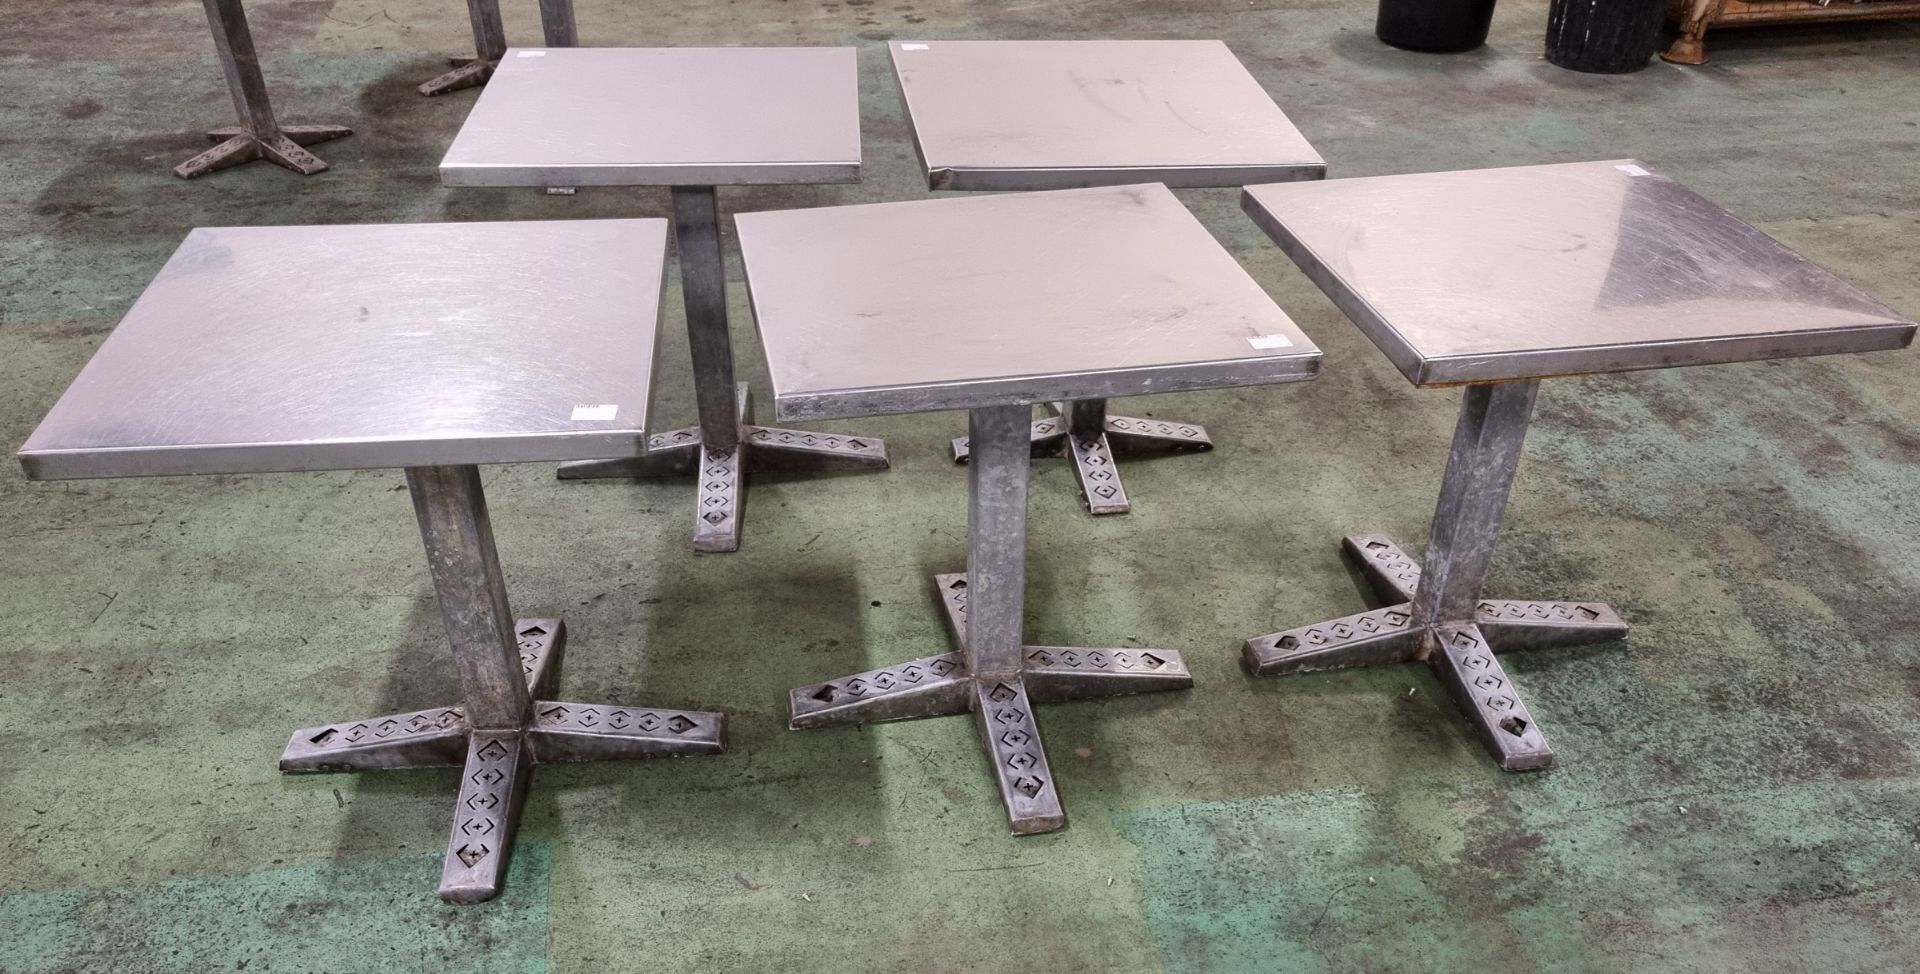 5x Square metal tables - tops are loose - W 700 x D 700 x H 750 mm - Image 2 of 7